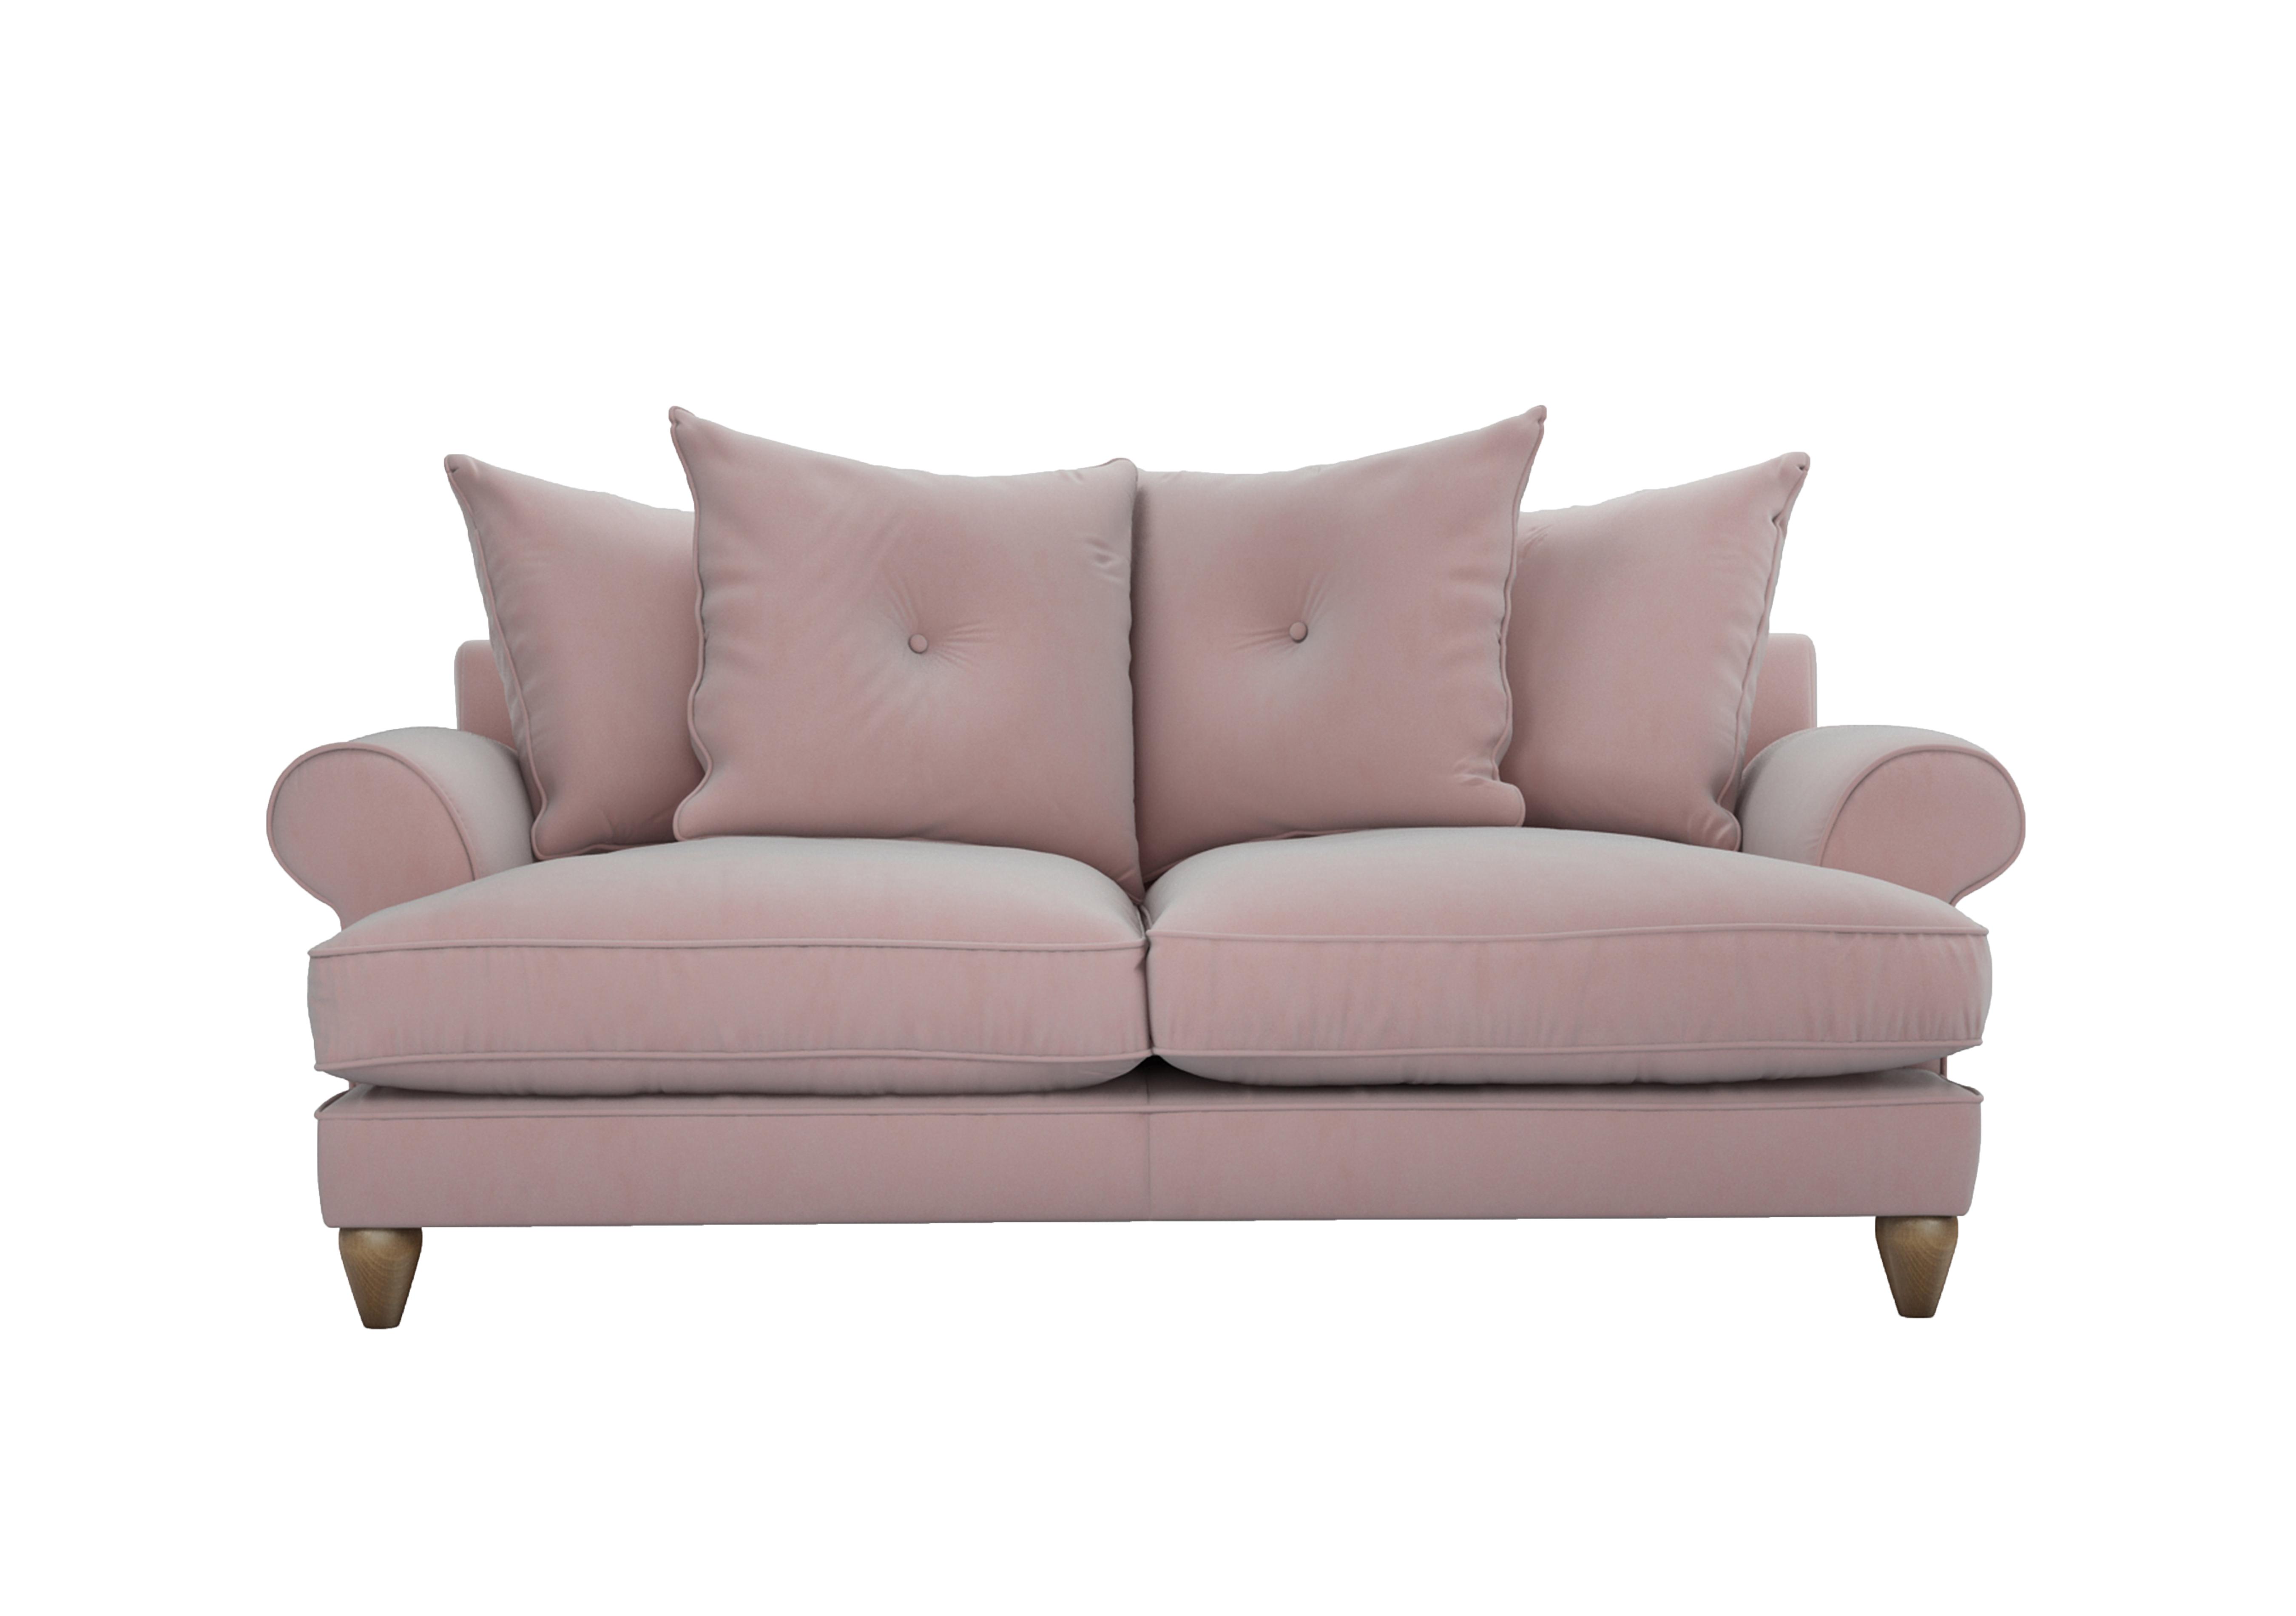 Bronwyn 3 Seater Fabric Scatter Back Sofa in Cot256 Cotton Candy on Furniture Village